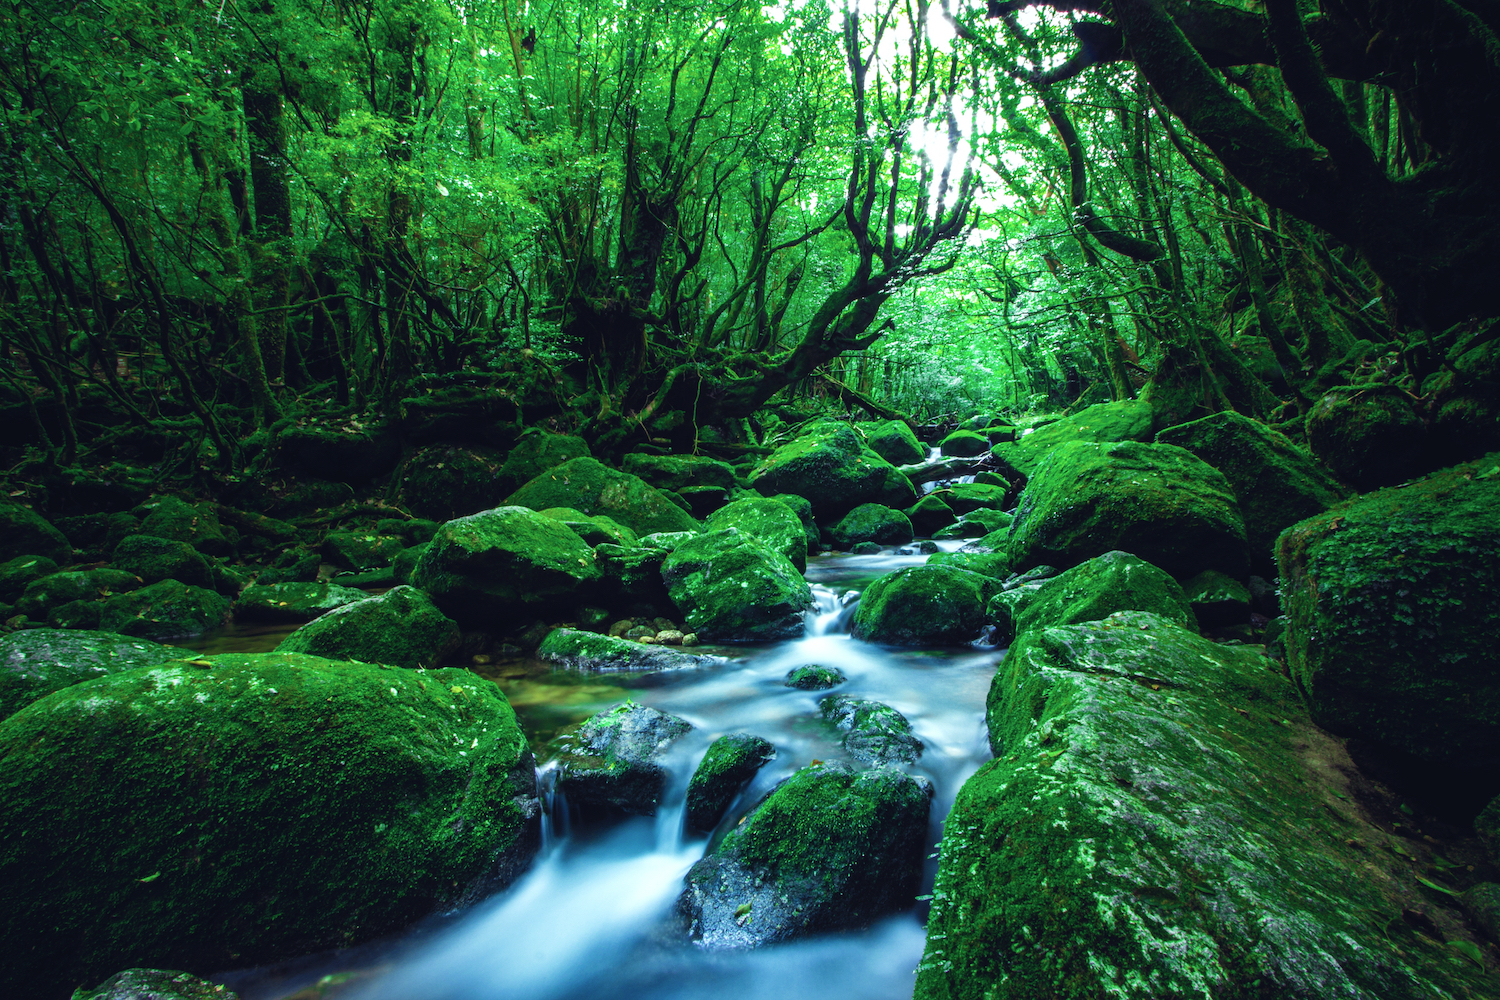 A vibrant scenery of a river in the middle of a forest in Yakushima, Japan